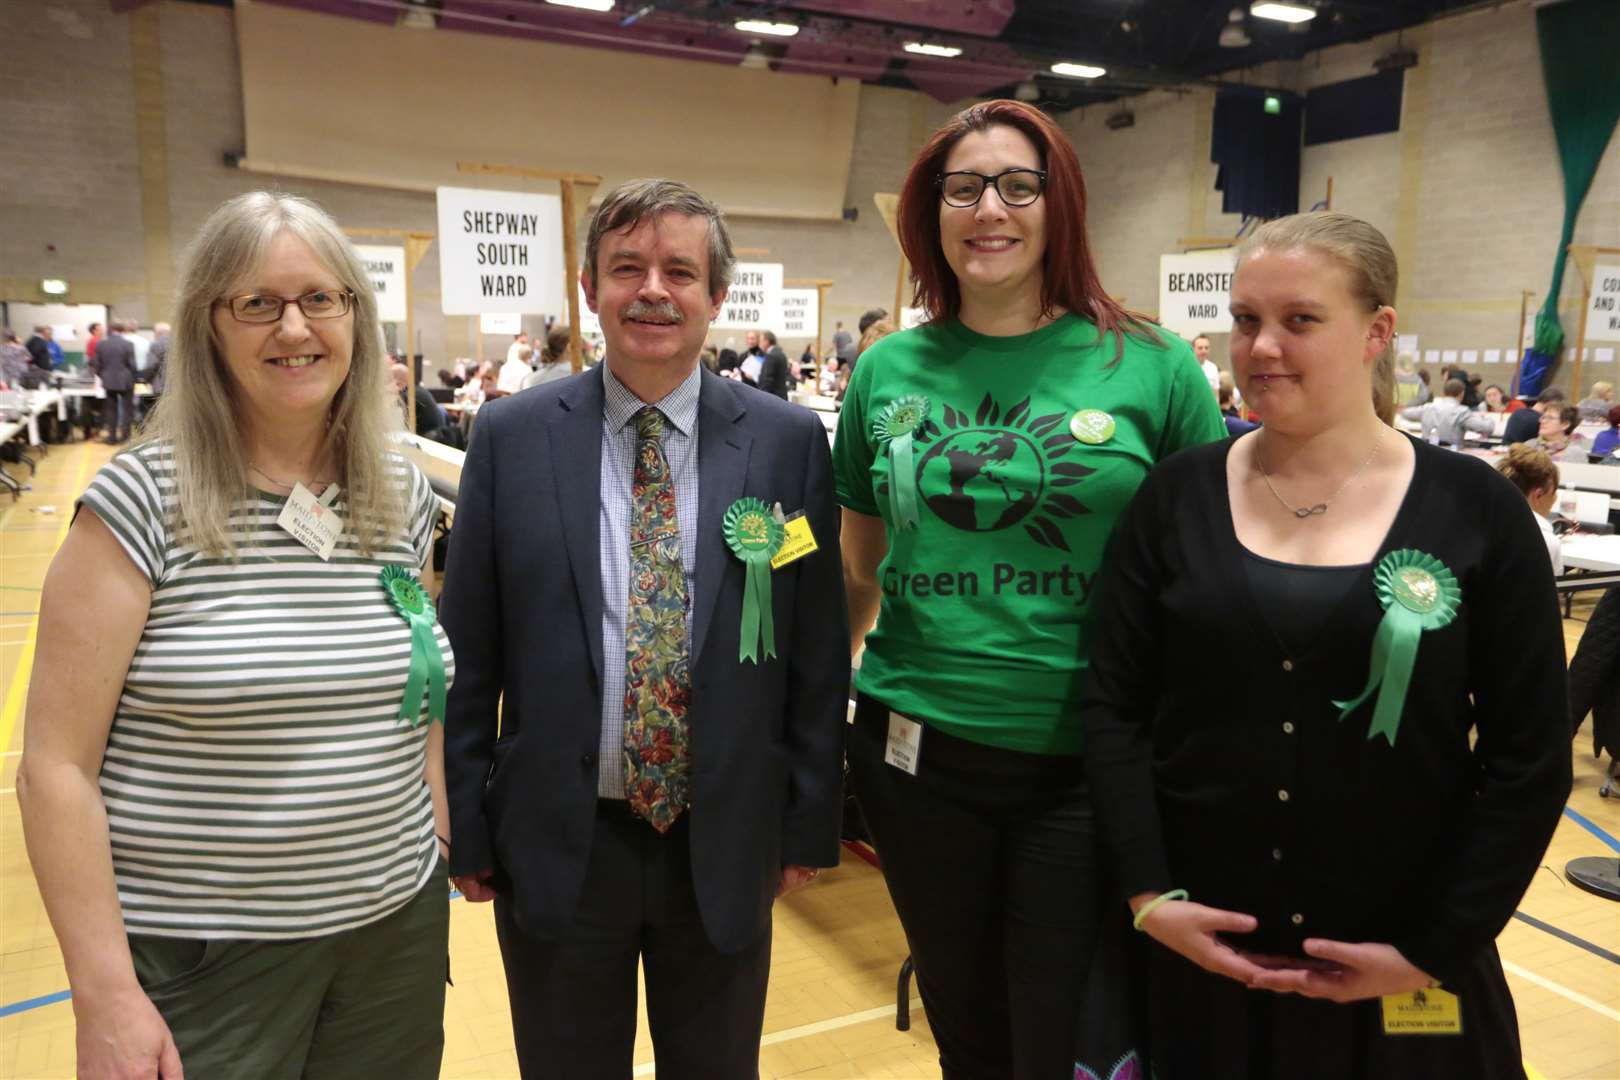 Tim Valentine and Hannah Patton with Green Party supporters